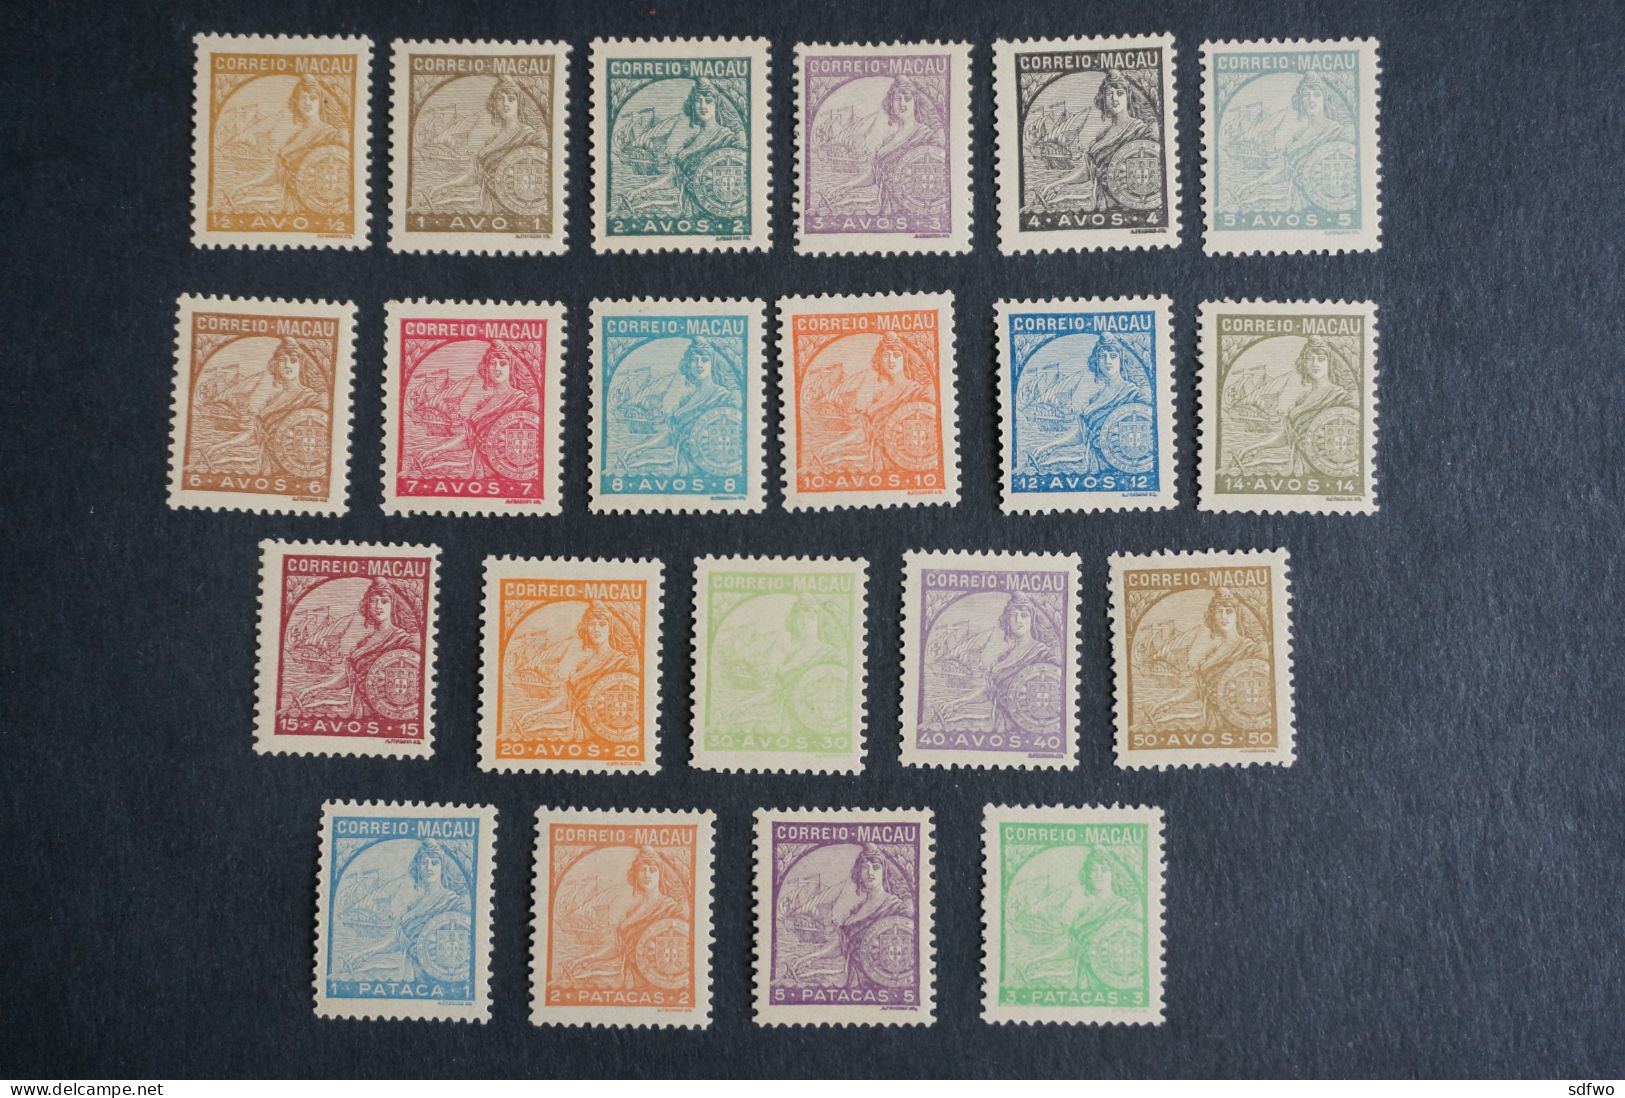 (T3) Macau Macao - 1934 Padroes Complete Set (21v) - MH - Unused Stamps